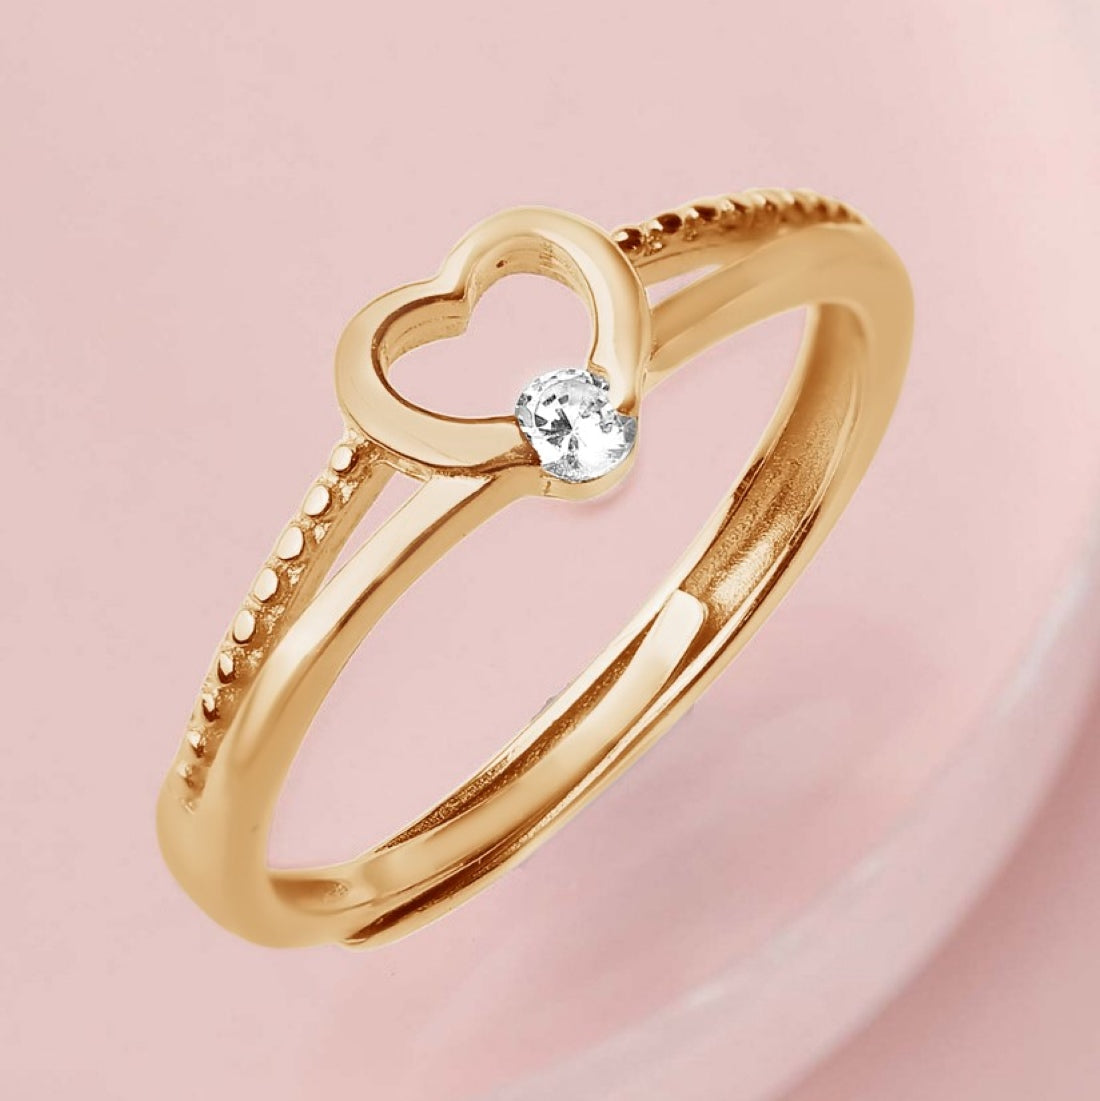 Heartfelt Love Adjustable Gold-Plated 925 Sterling Silver Ring with Cubic Zirconia